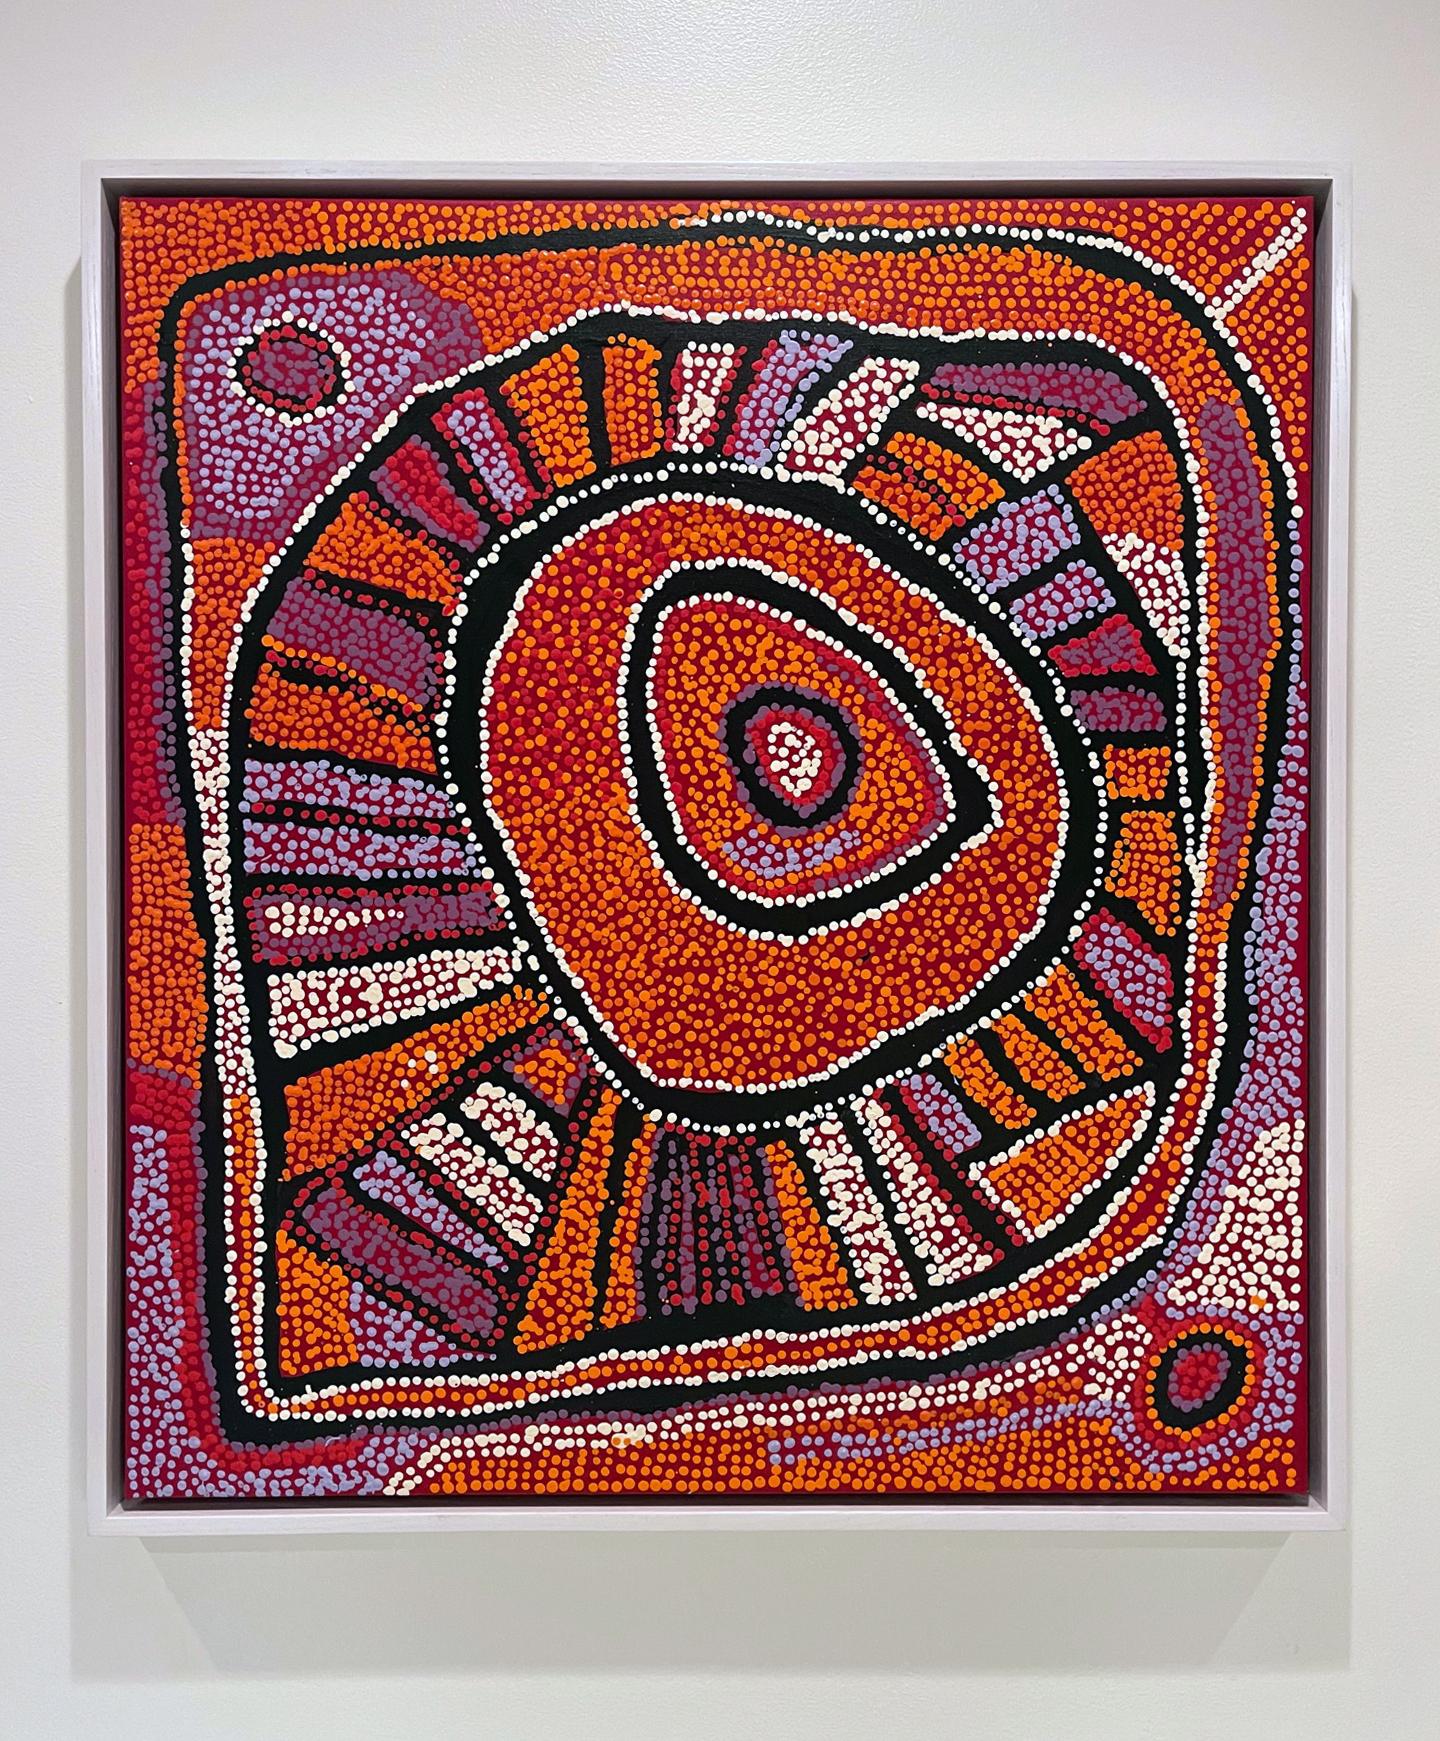 A beautiful dot painting by celebrated Australian Aboriginal artist Naata Nungurrayi (1932-2021) depicting
Women's Ceremony at Marrapinti. Mesmerizing composition of dots in brilliant shifting colors, iconic in the artist's work. Float framed in a